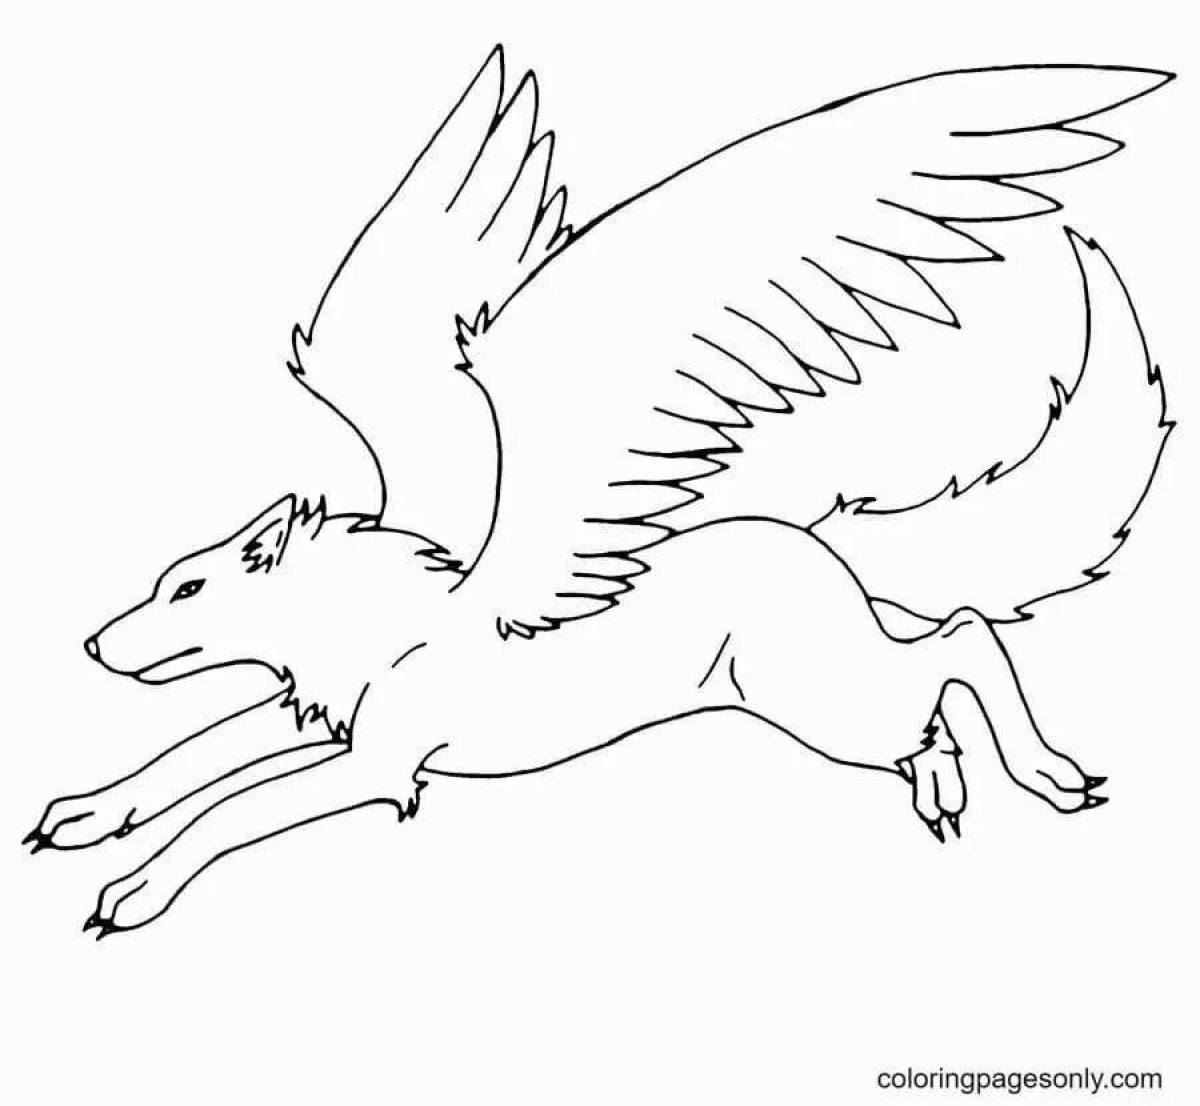 Gorgeous wolf coloring book with wings